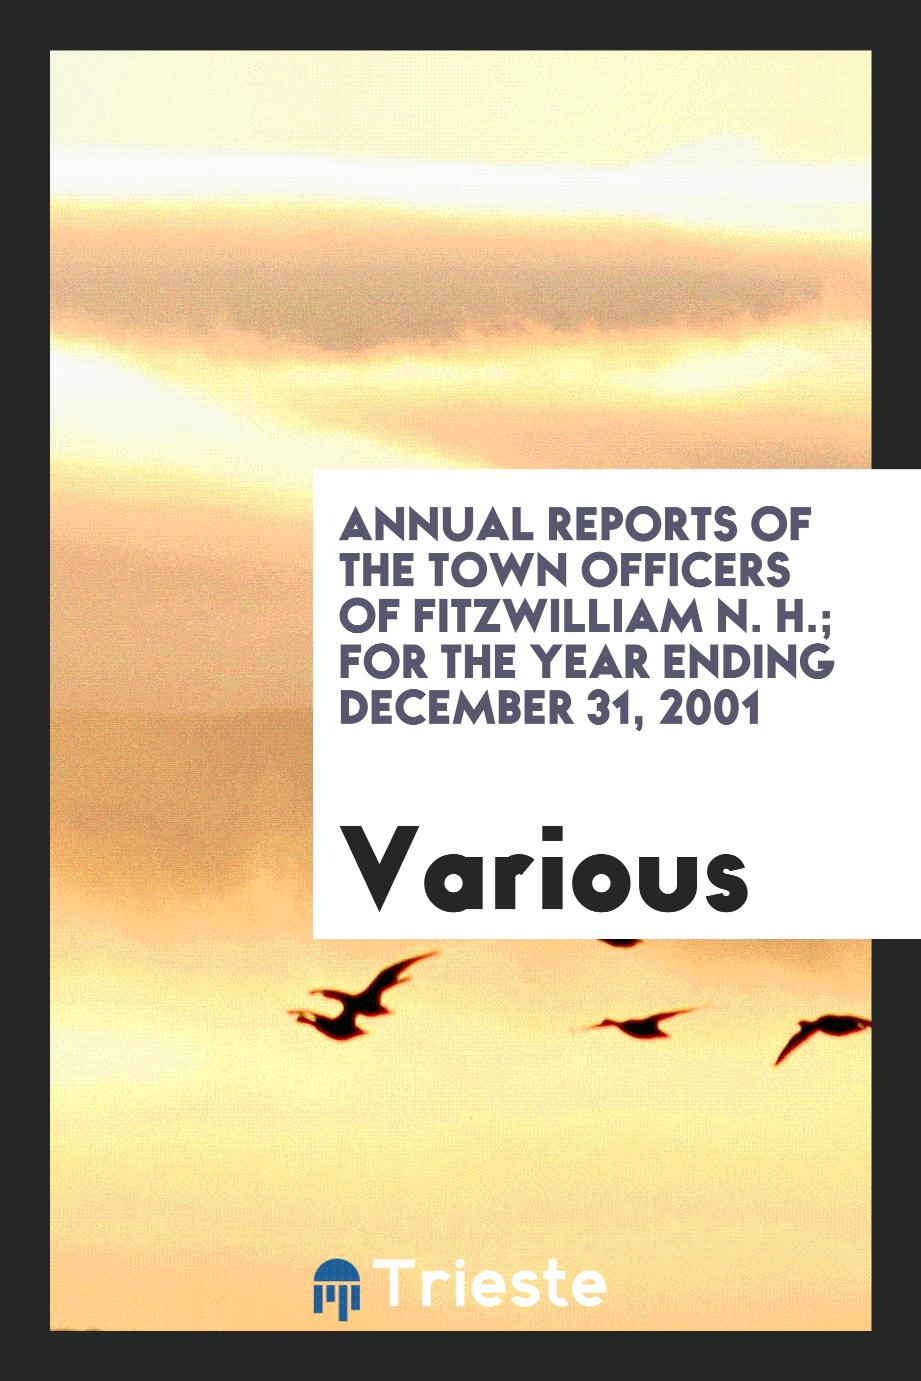 Annual Reports of the town officers of Fitzwilliam N. H.; For the year ending December 31, 2001